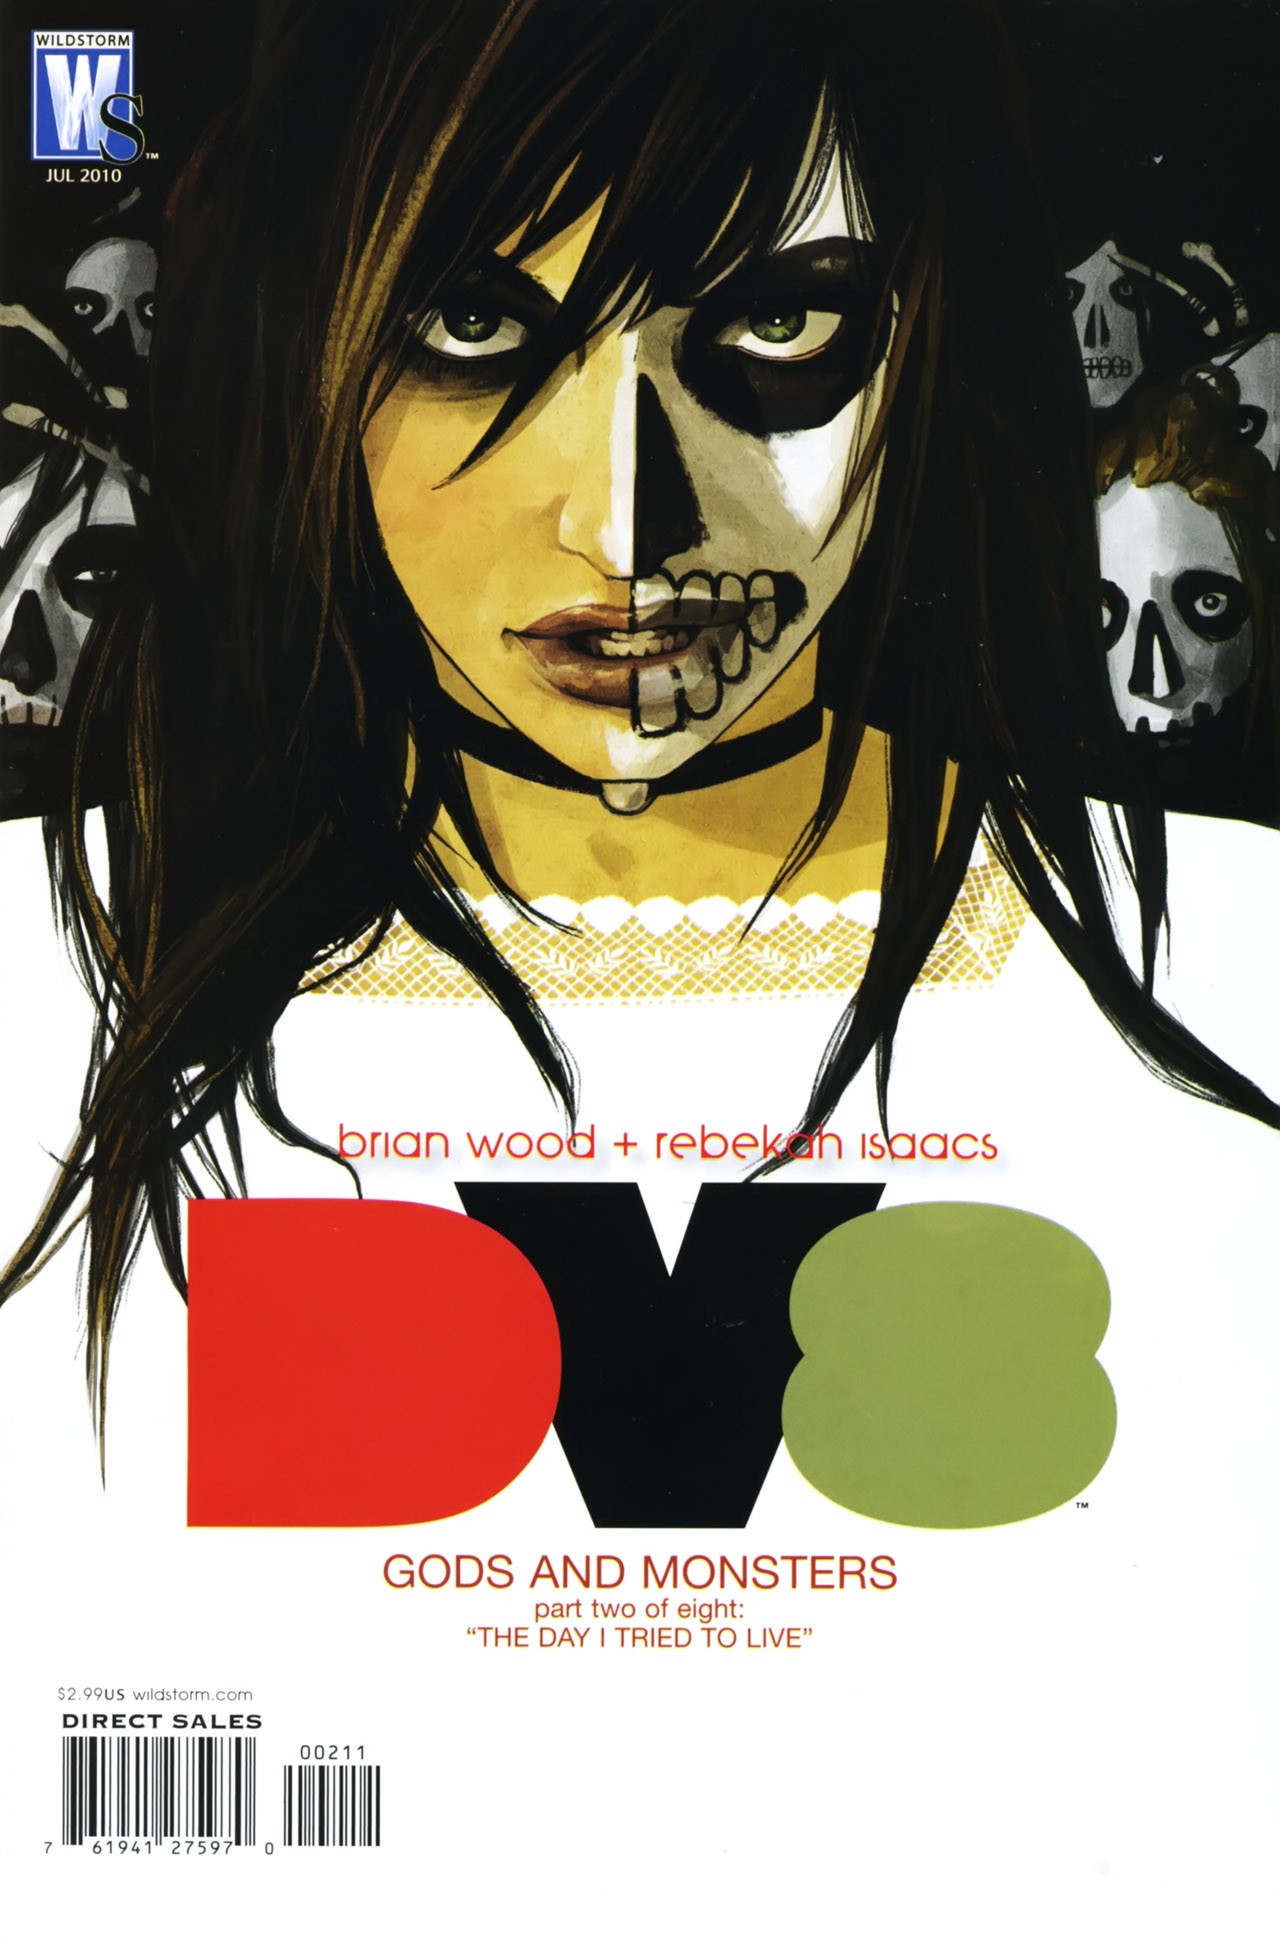 DV8: Gods and Monsters Vol. 1 #2